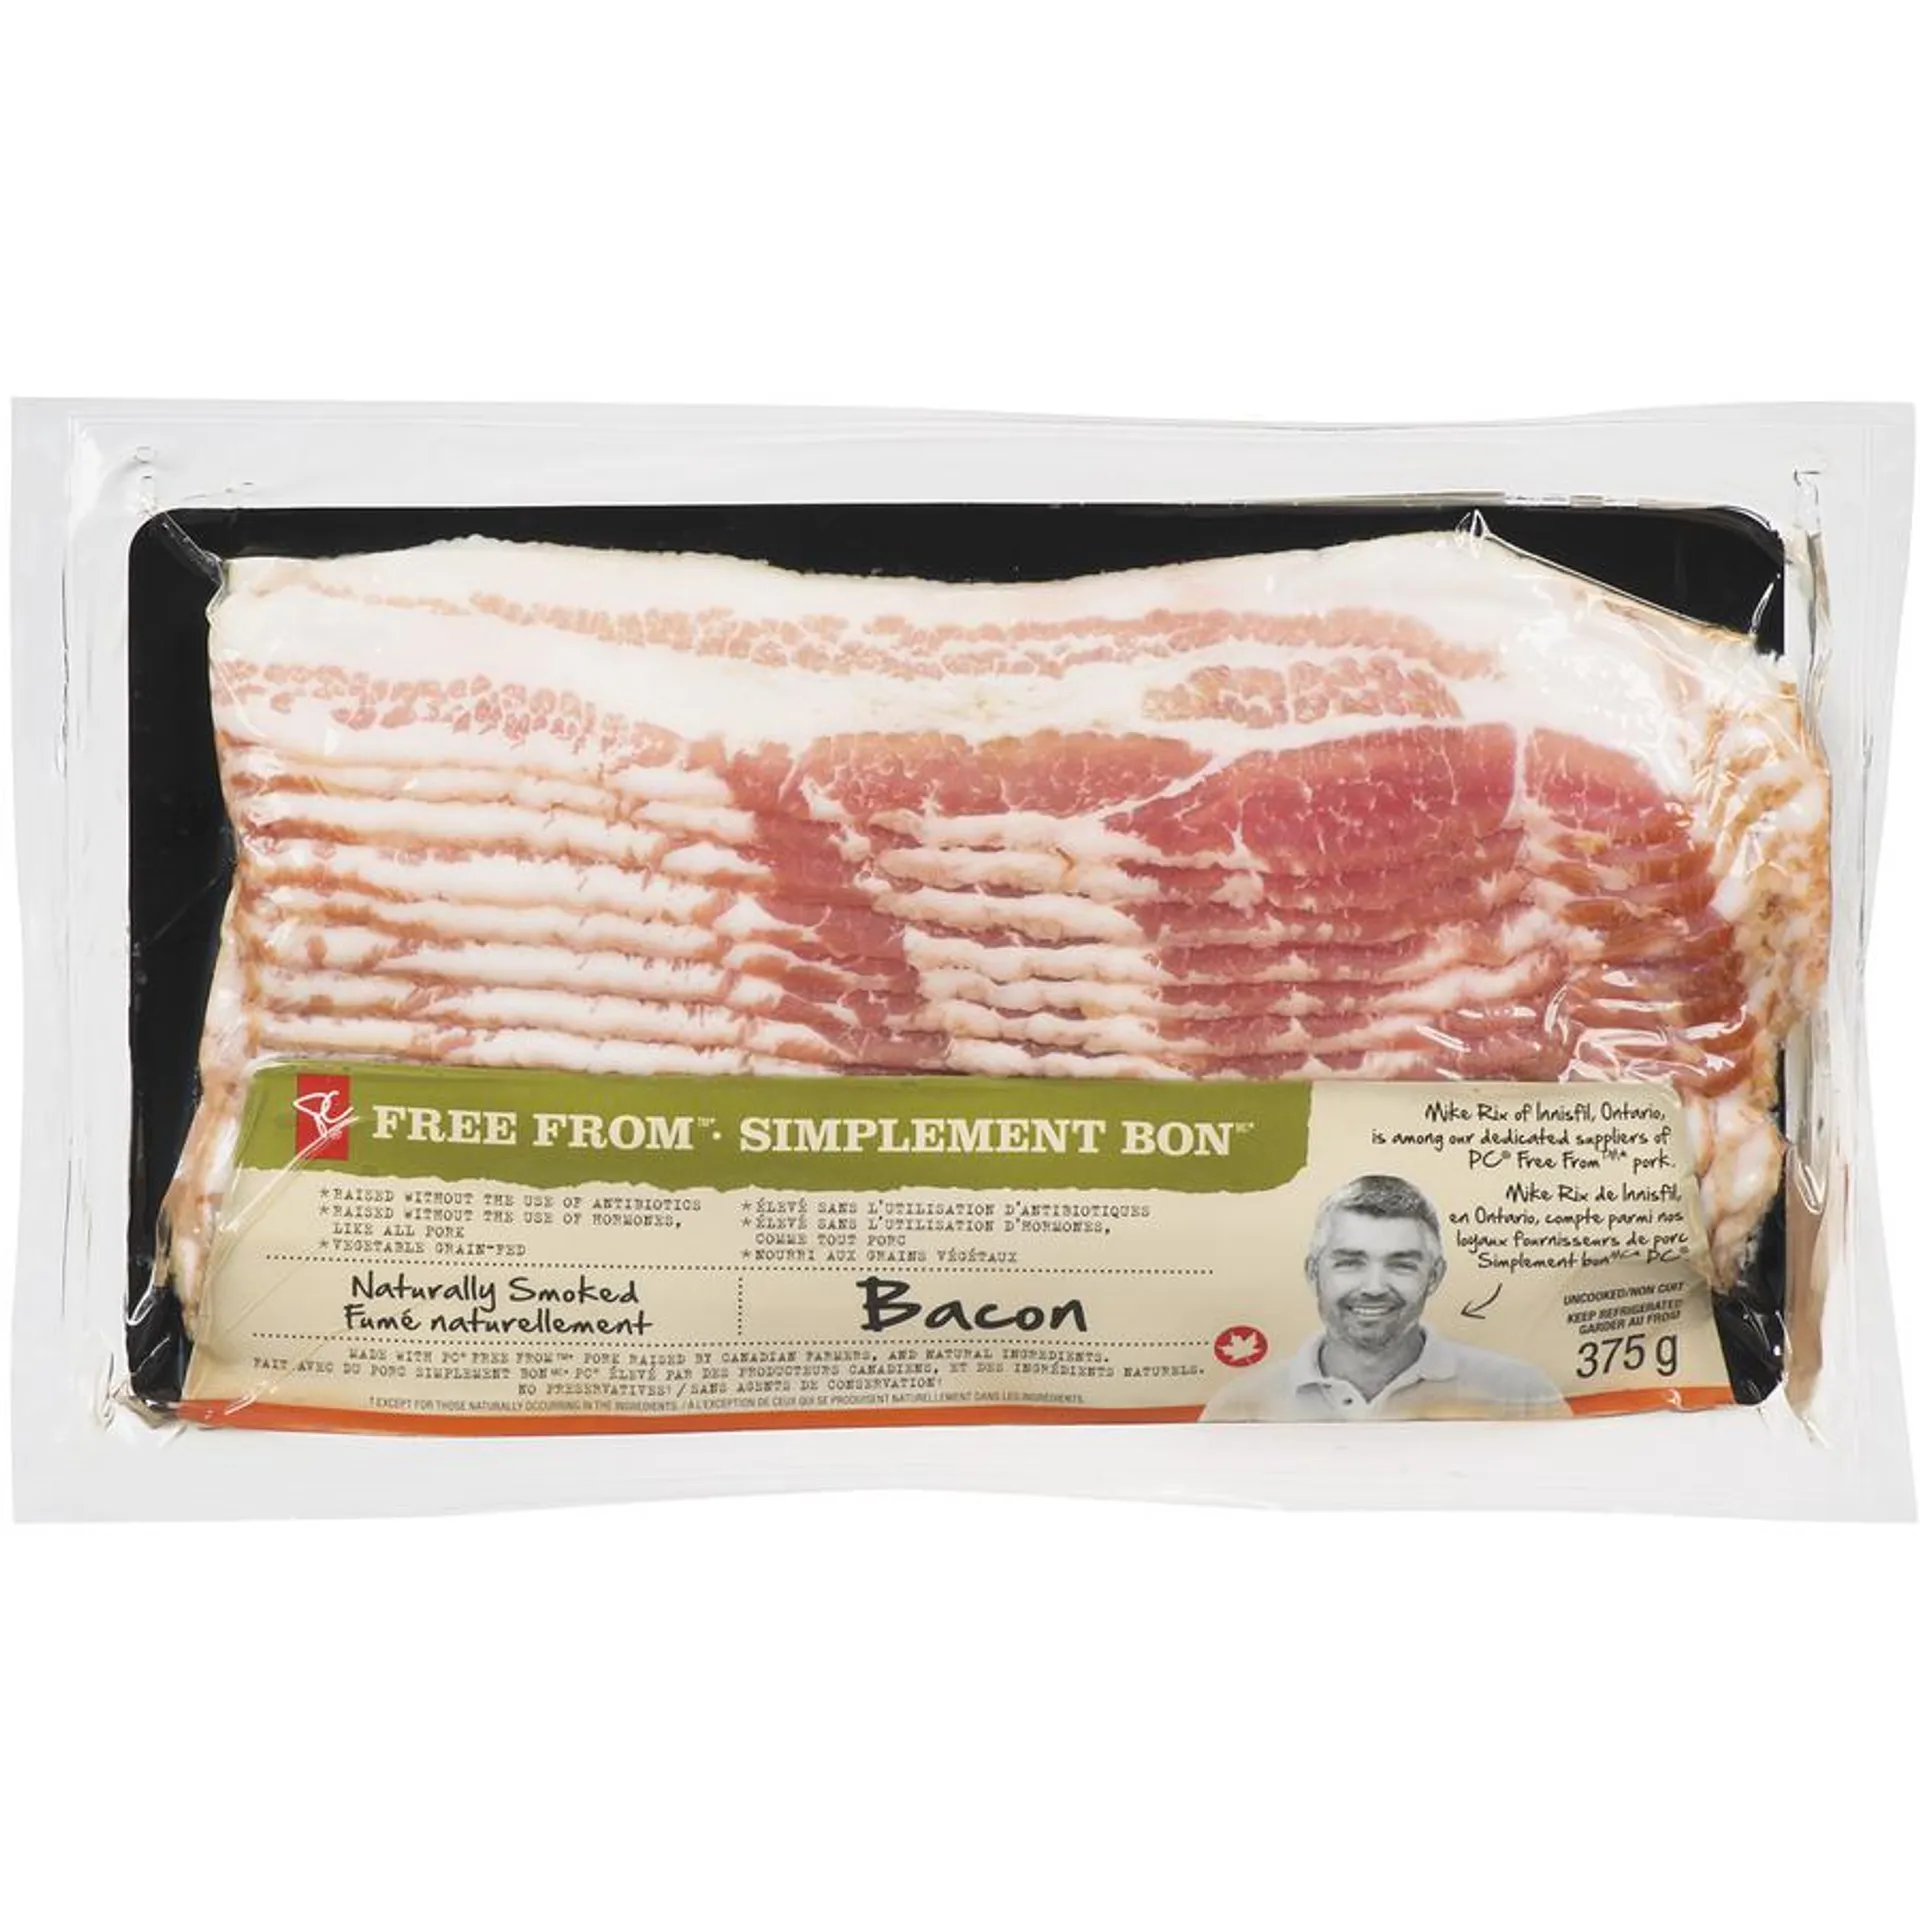 Free From Bacon Naturally Smoked